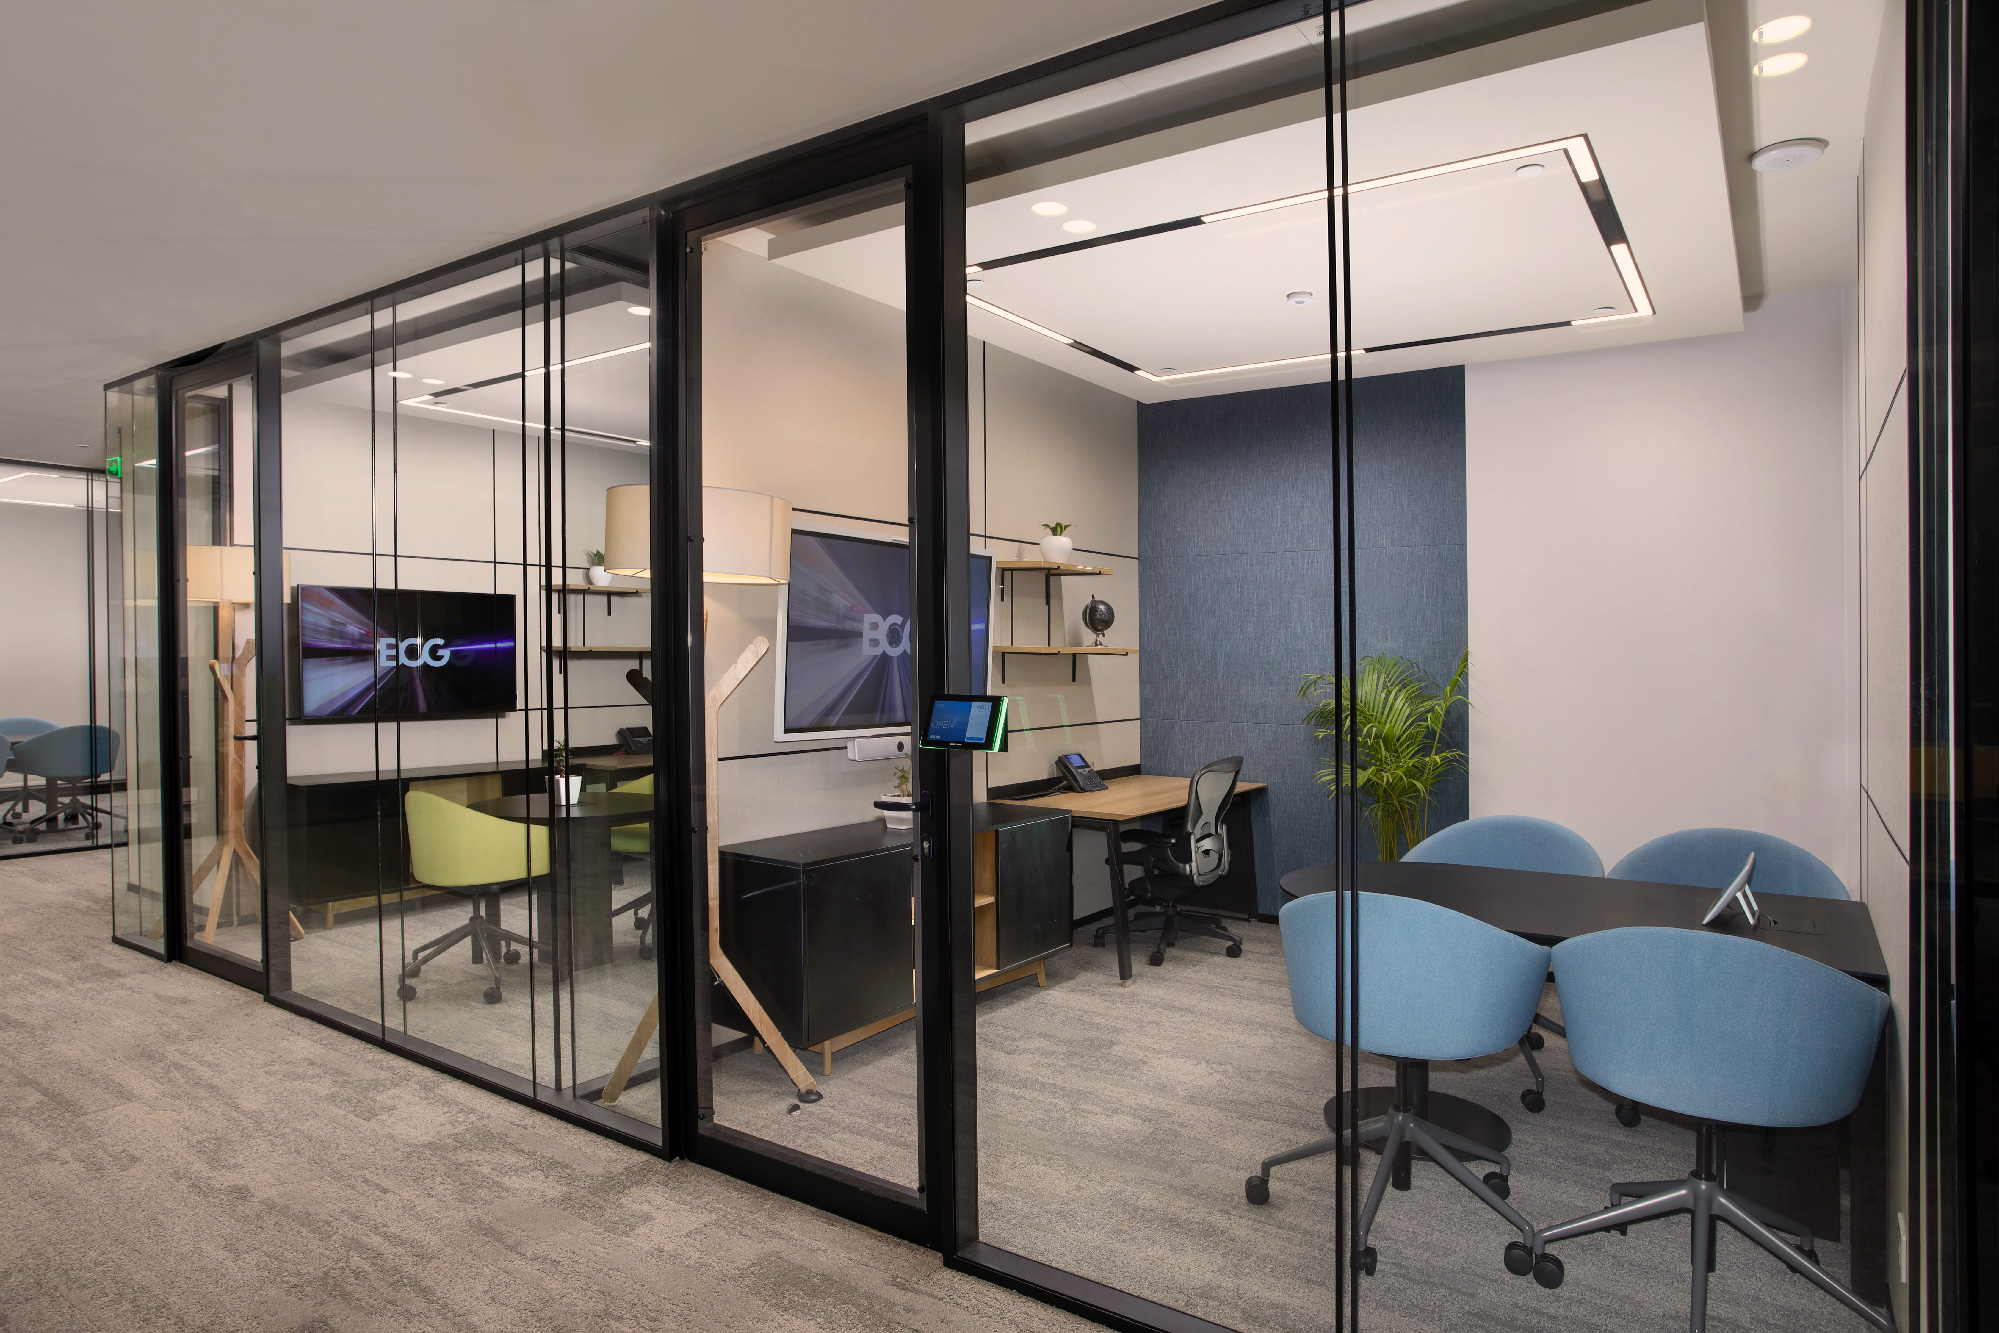 BCG - Innovative technology-enabled collaborative spaces fostering teamwork and productivity